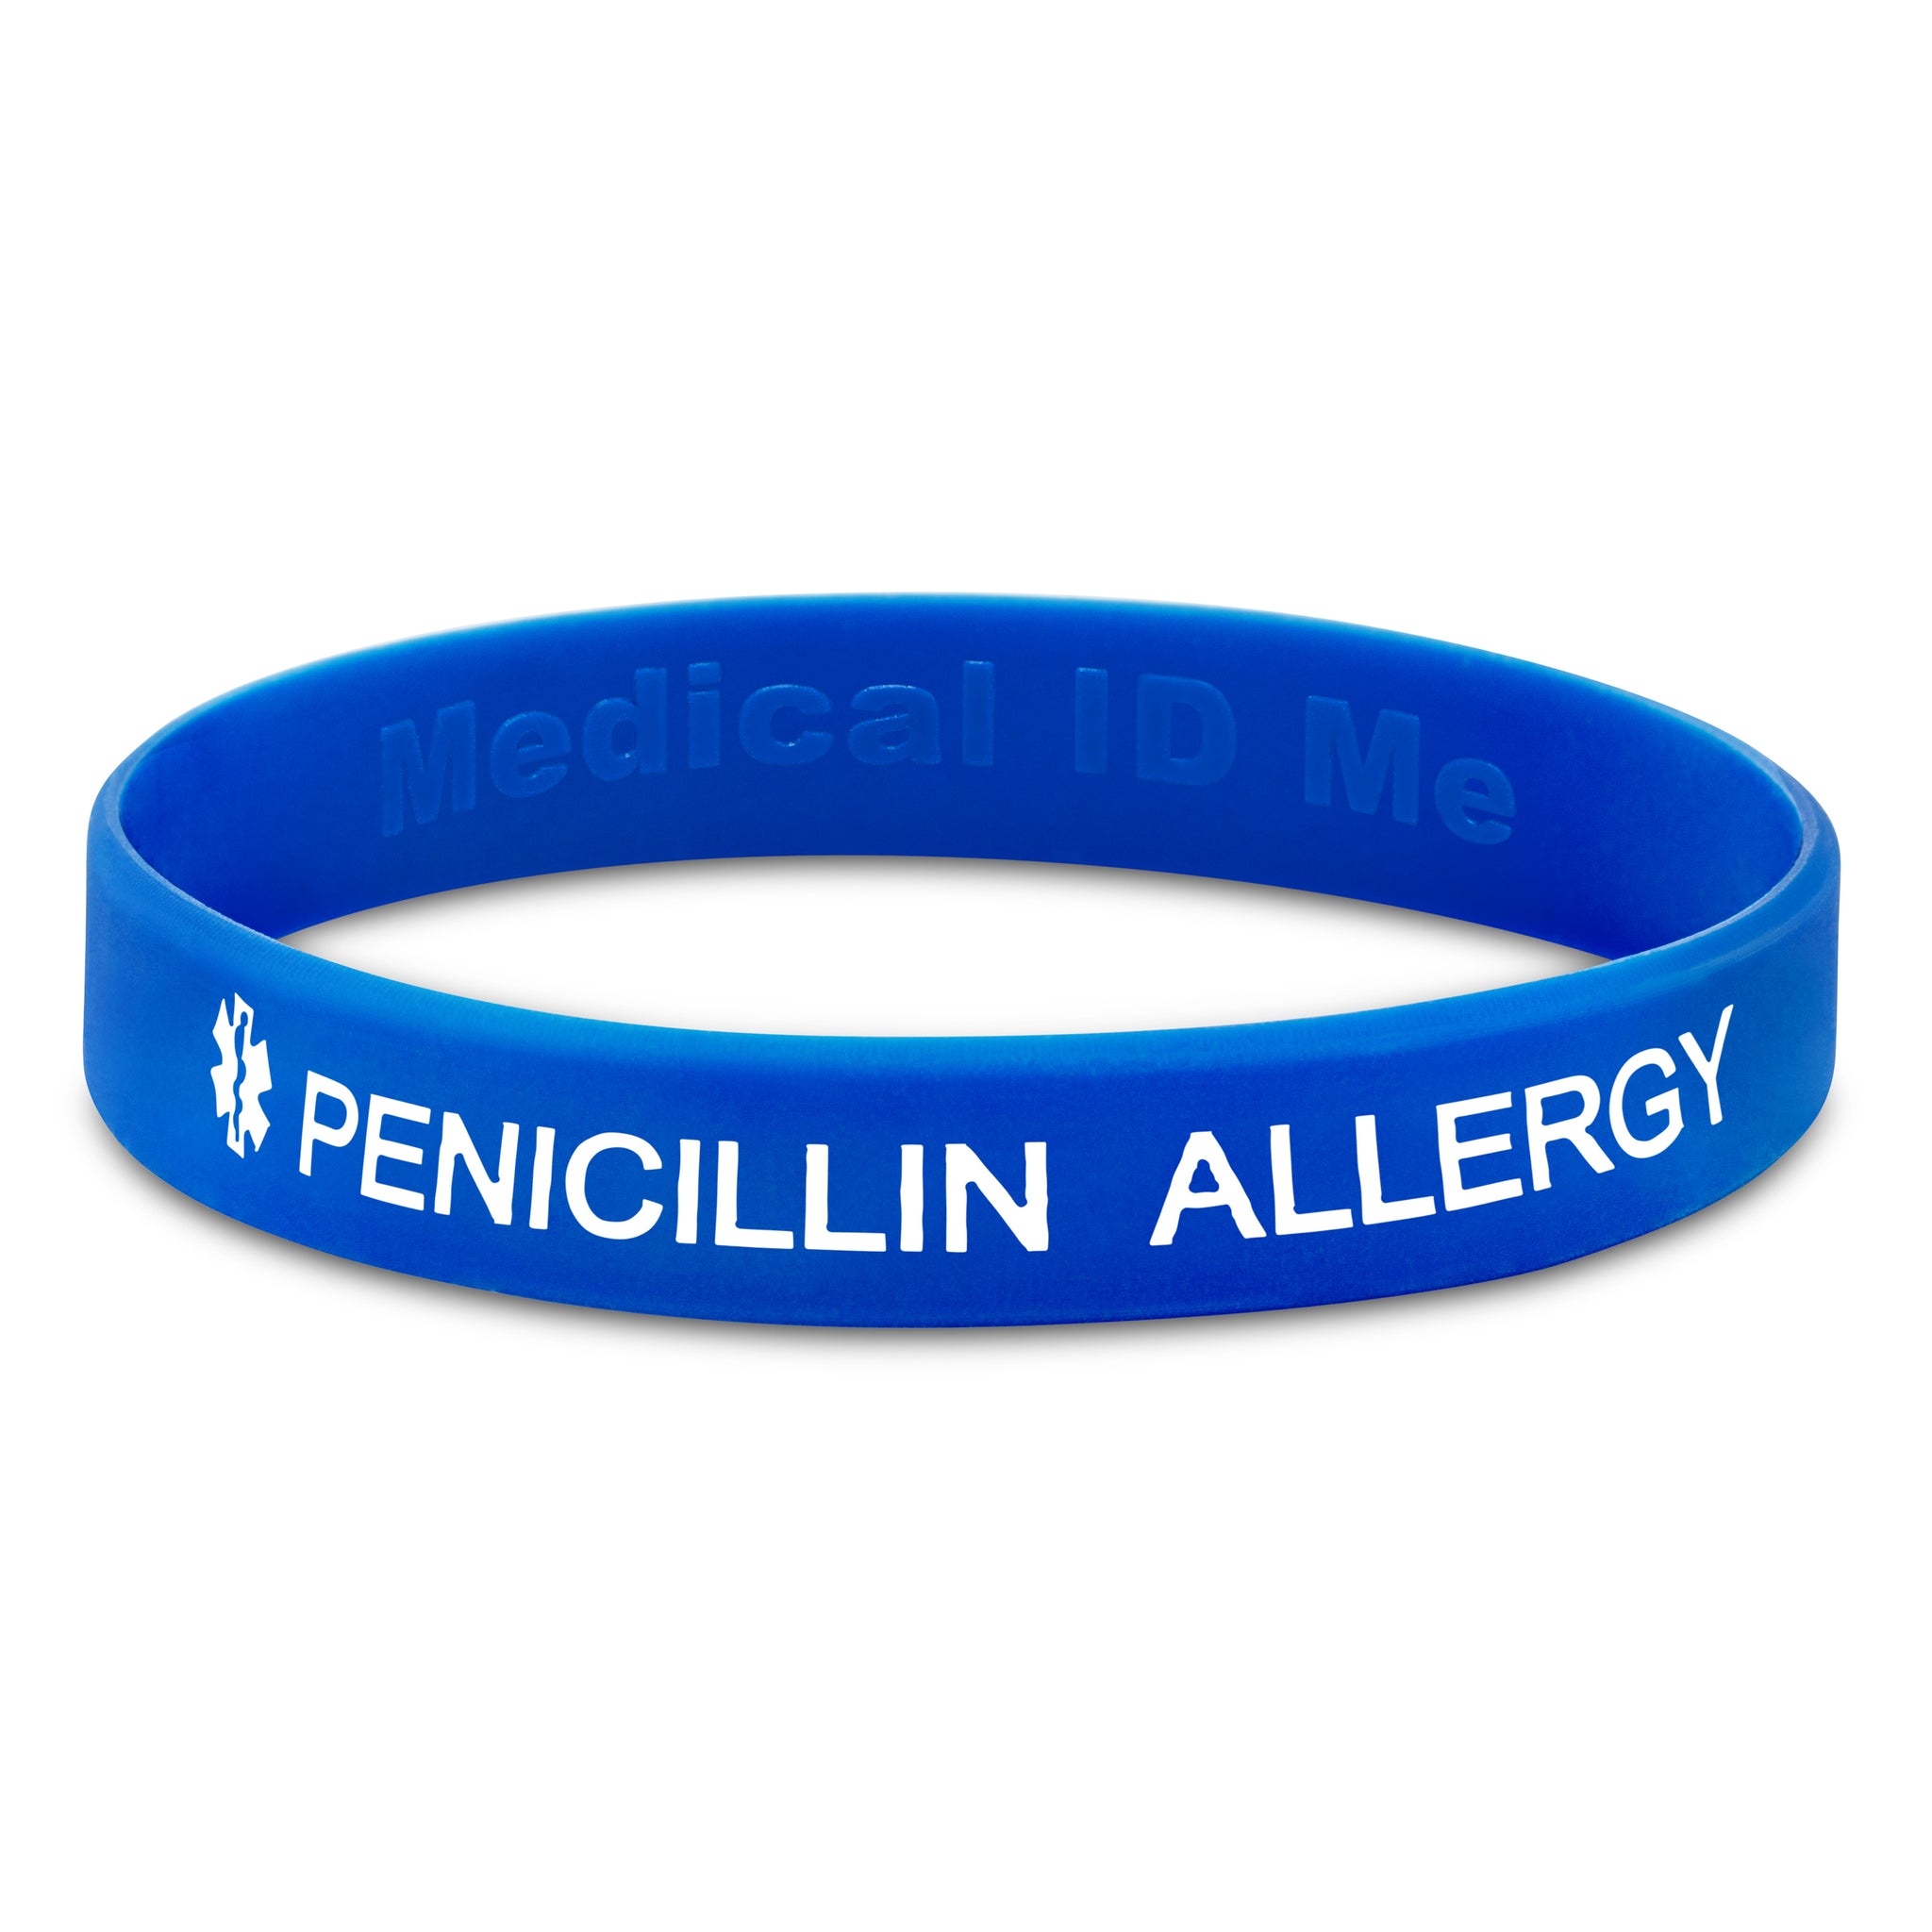 Penicillin Allergy Wristbands Medical Alert ID Bracelets. PCN Allergic  Silicone Awareness Bands (1 Band Only - Black - Shipped by Amazon) :  Amazon.co.uk: Handmade Products